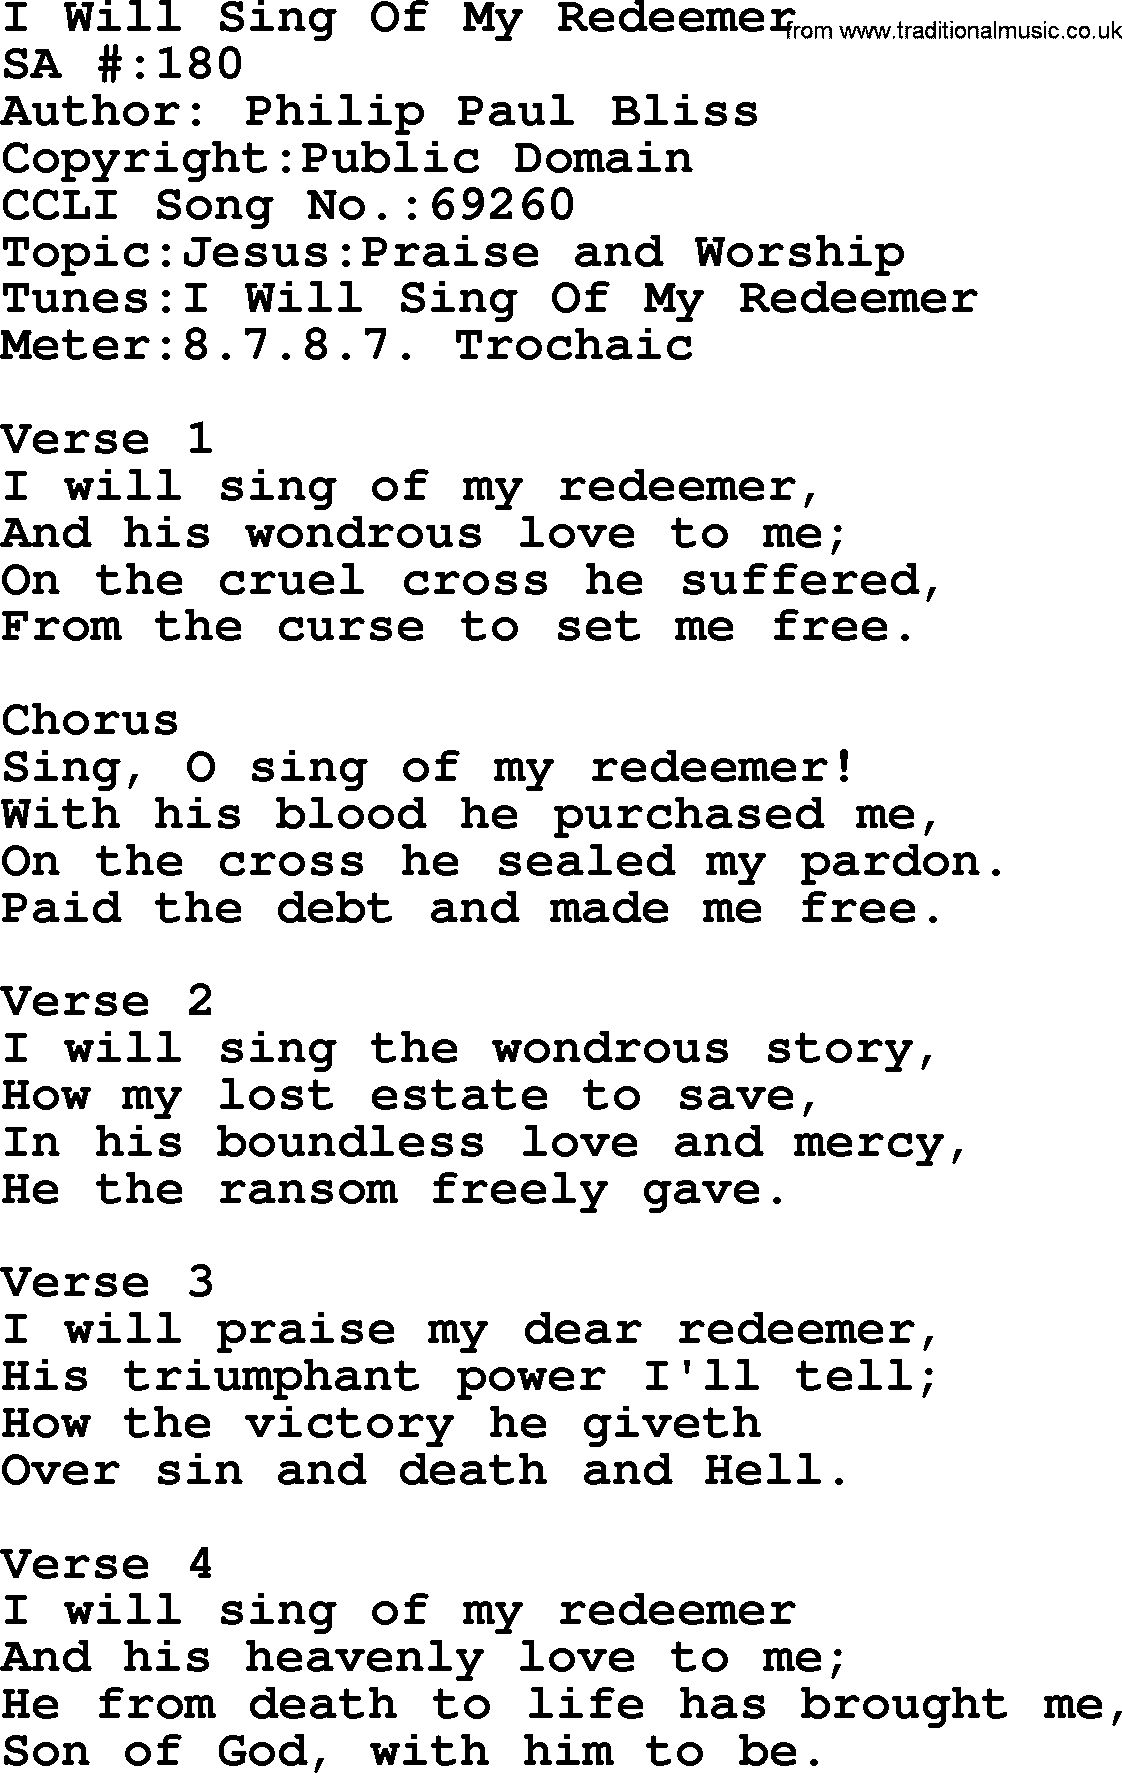 Salvation Army Hymnal, title: I Will Sing Of My Redeemer, with lyrics and PDF,